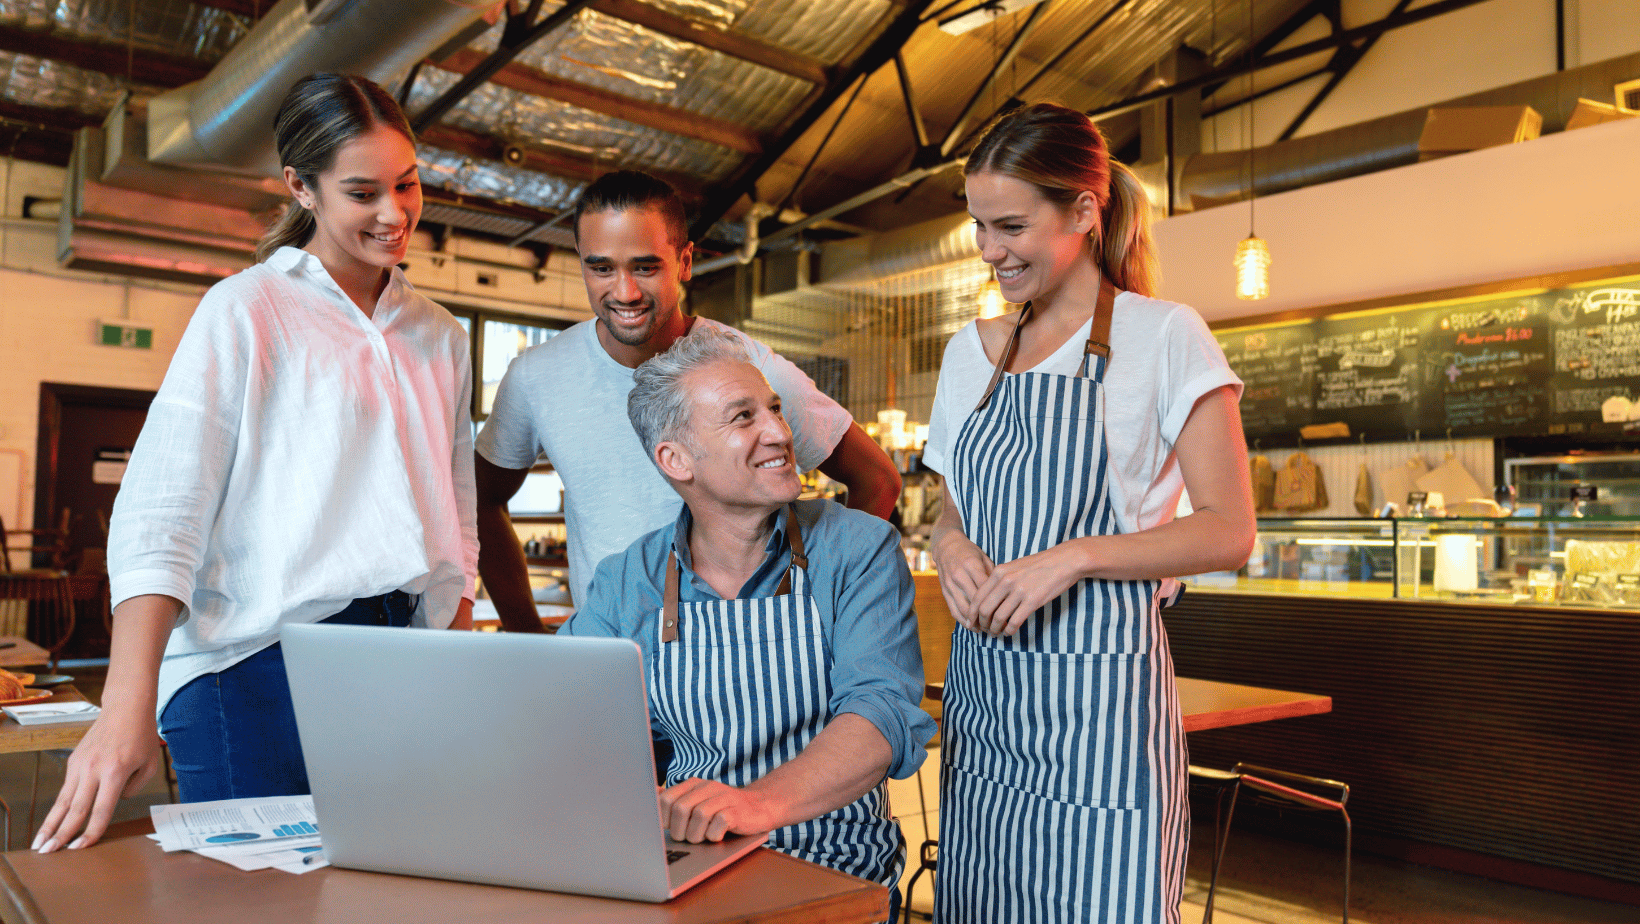 Restaurant owner showing sharing information on his laptop with staff members. 